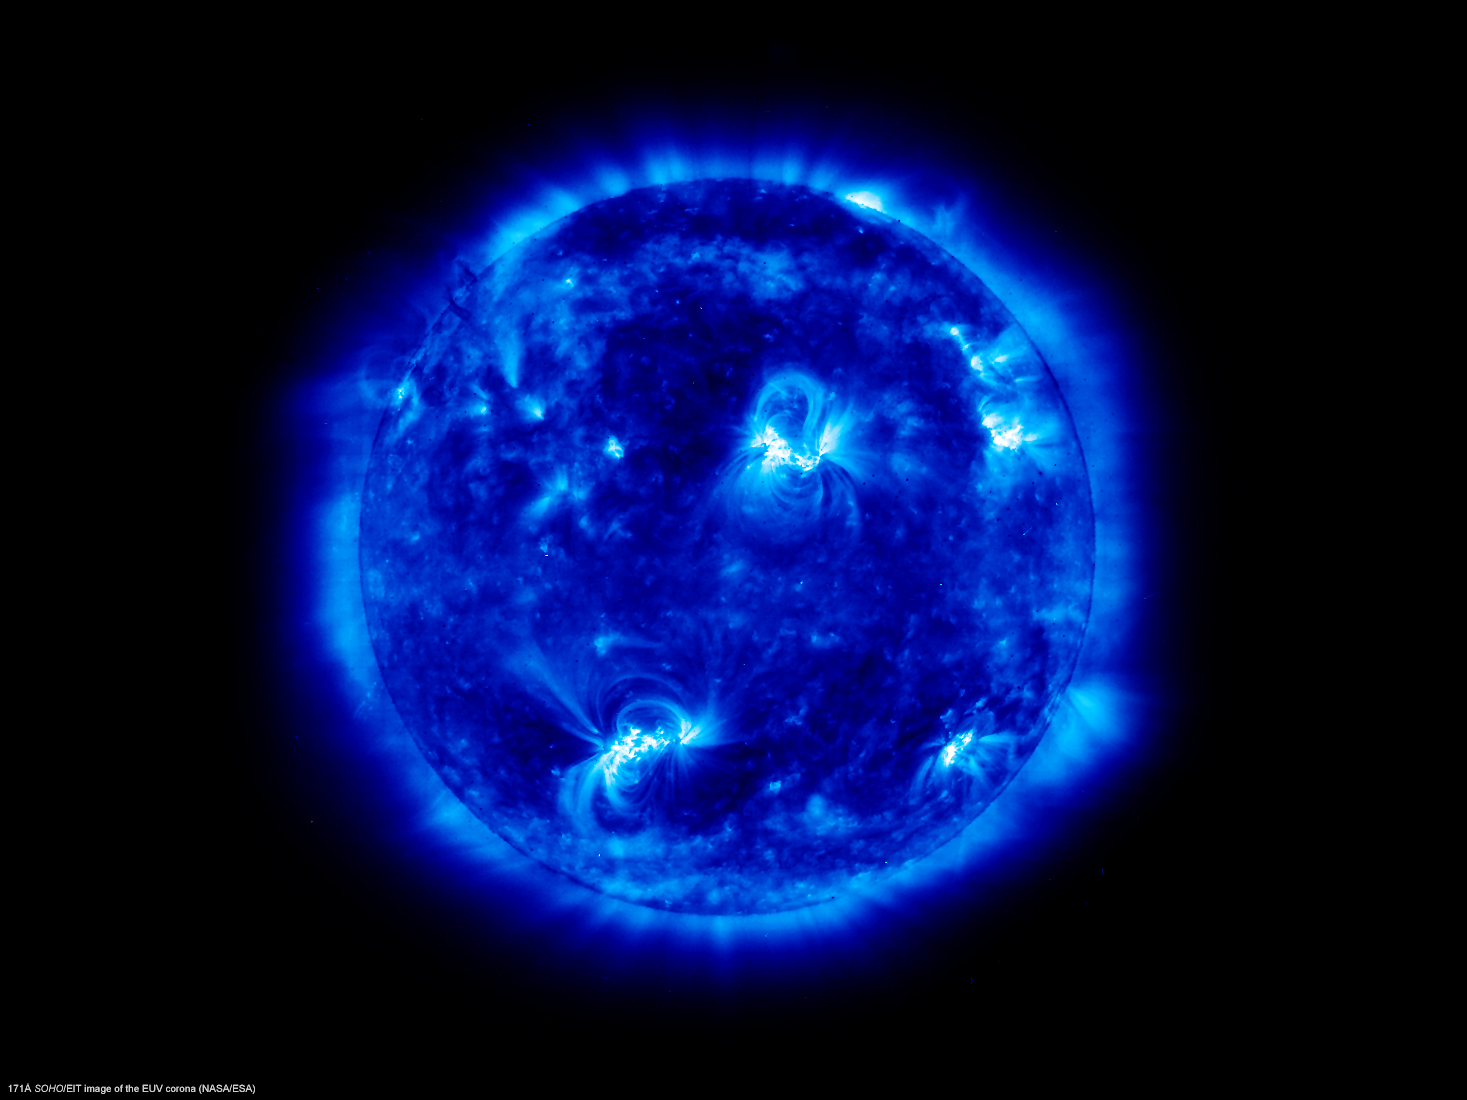 Solar Flare Live Wallpaper 171a Soho Eit Image Of The Sun